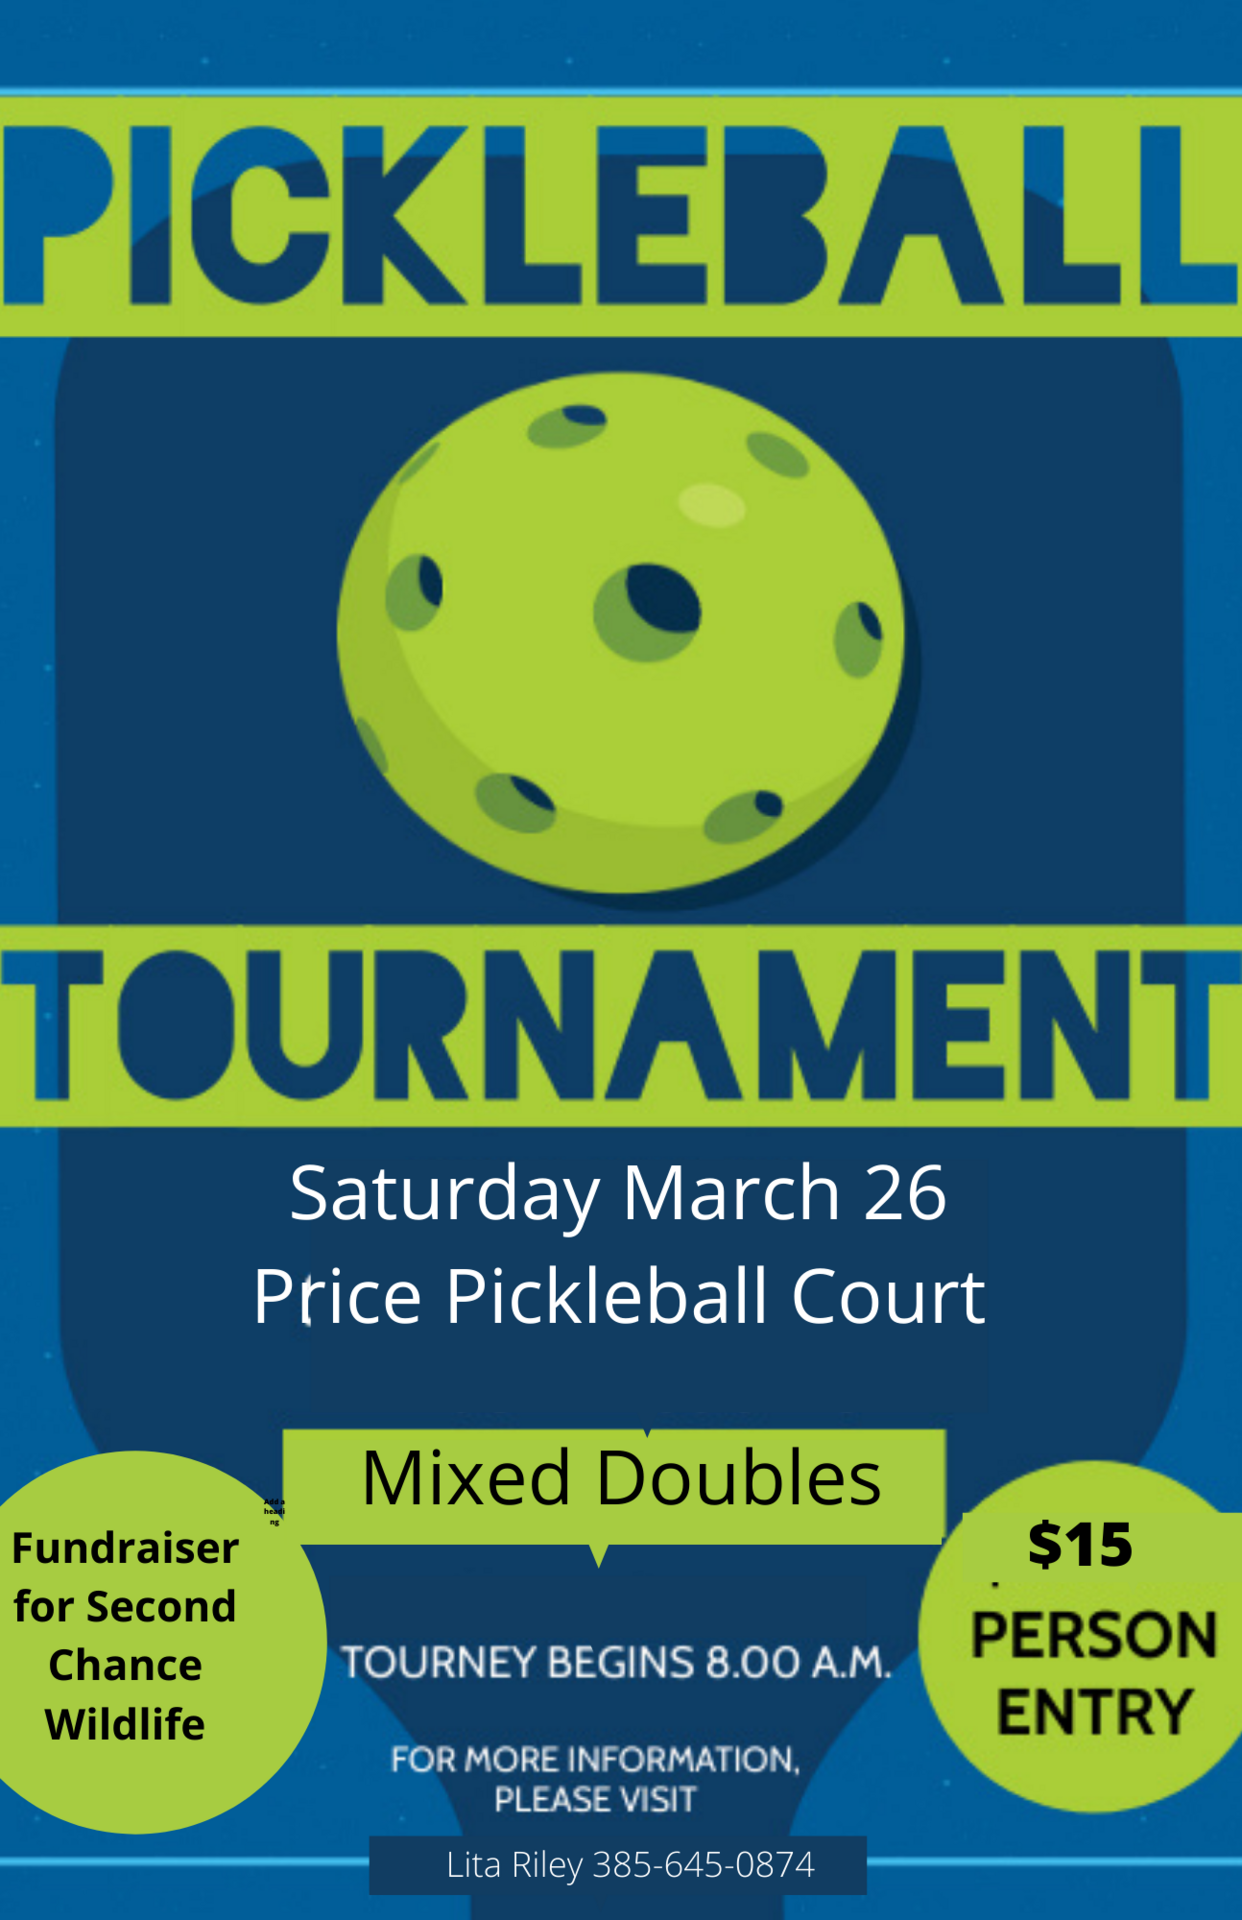 Saturday-March-26-Price-Pickleball-Court.png